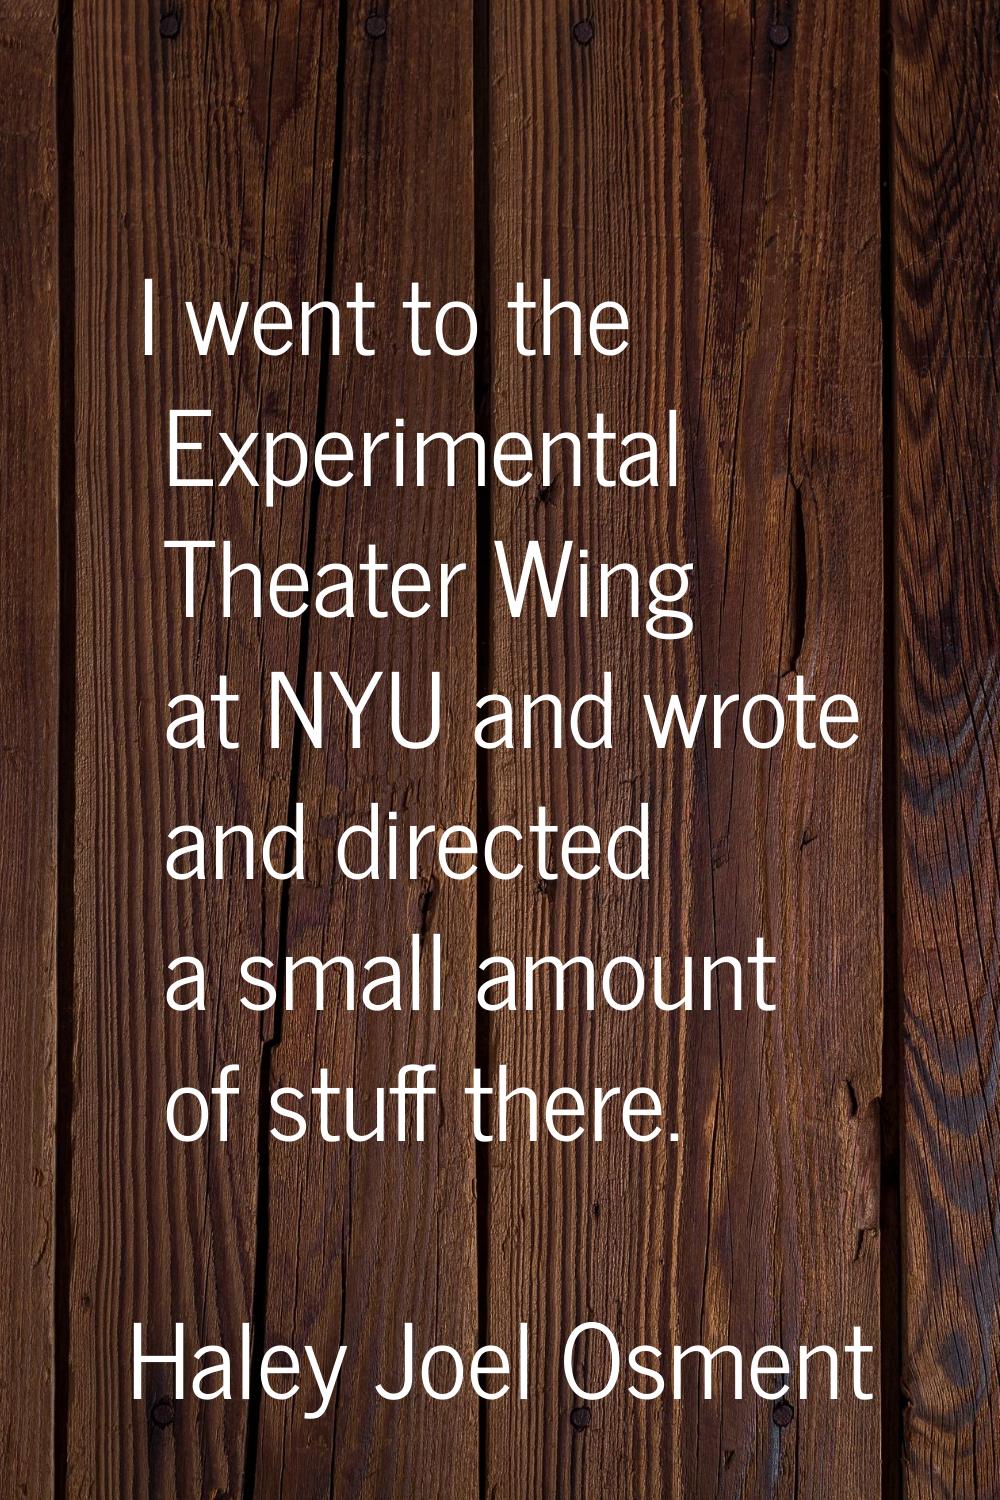 I went to the Experimental Theater Wing at NYU and wrote and directed a small amount of stuff there